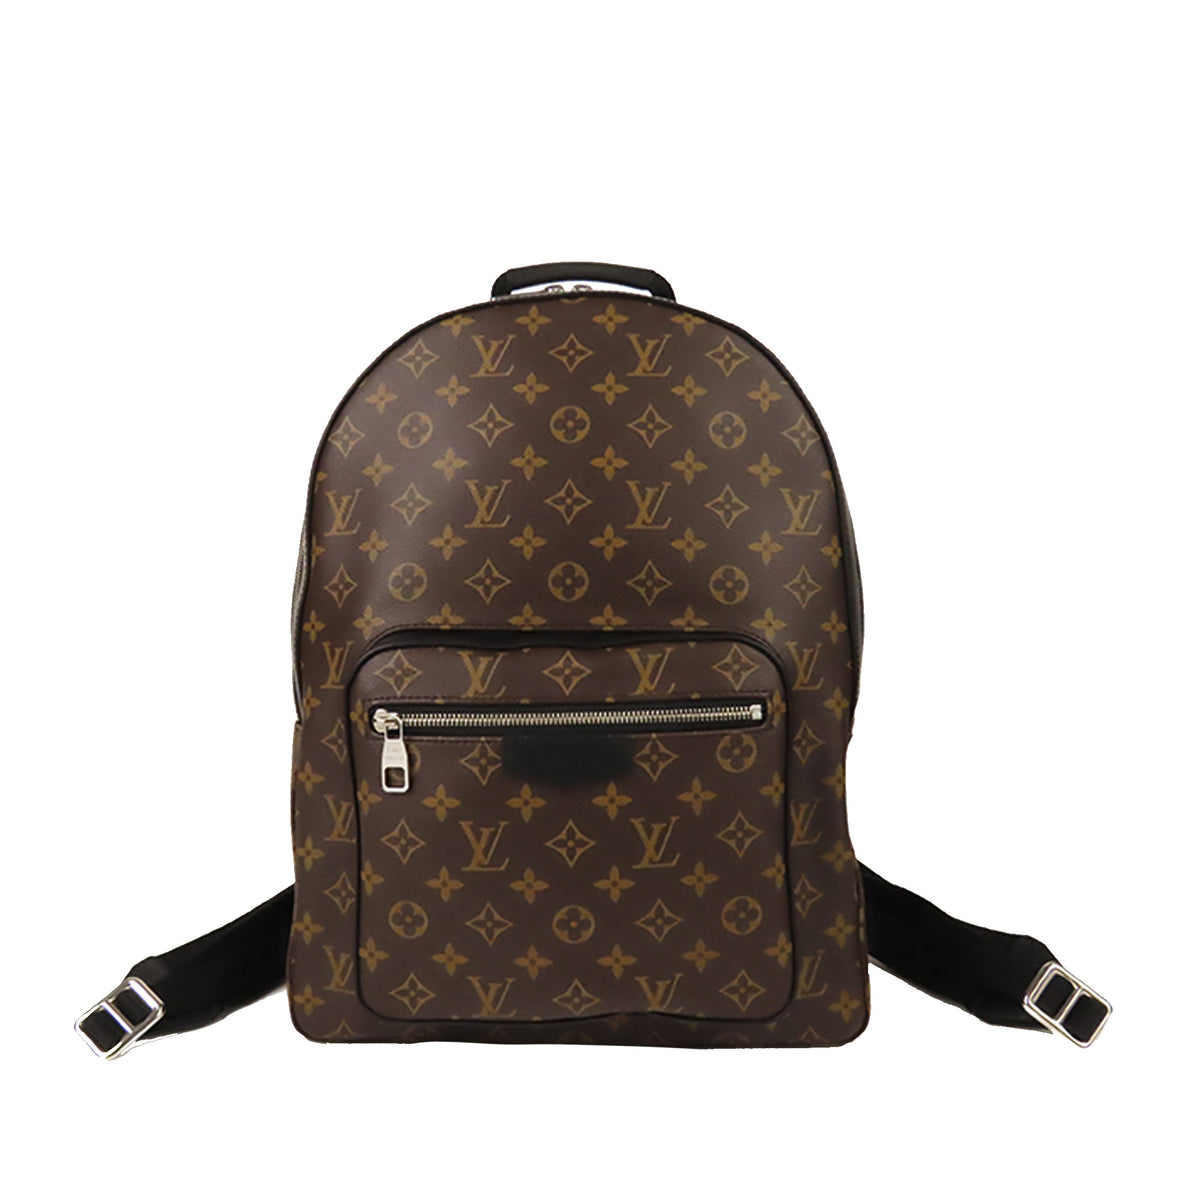 Louis Vuitton Josh Backpack in Good Condition -  Israel